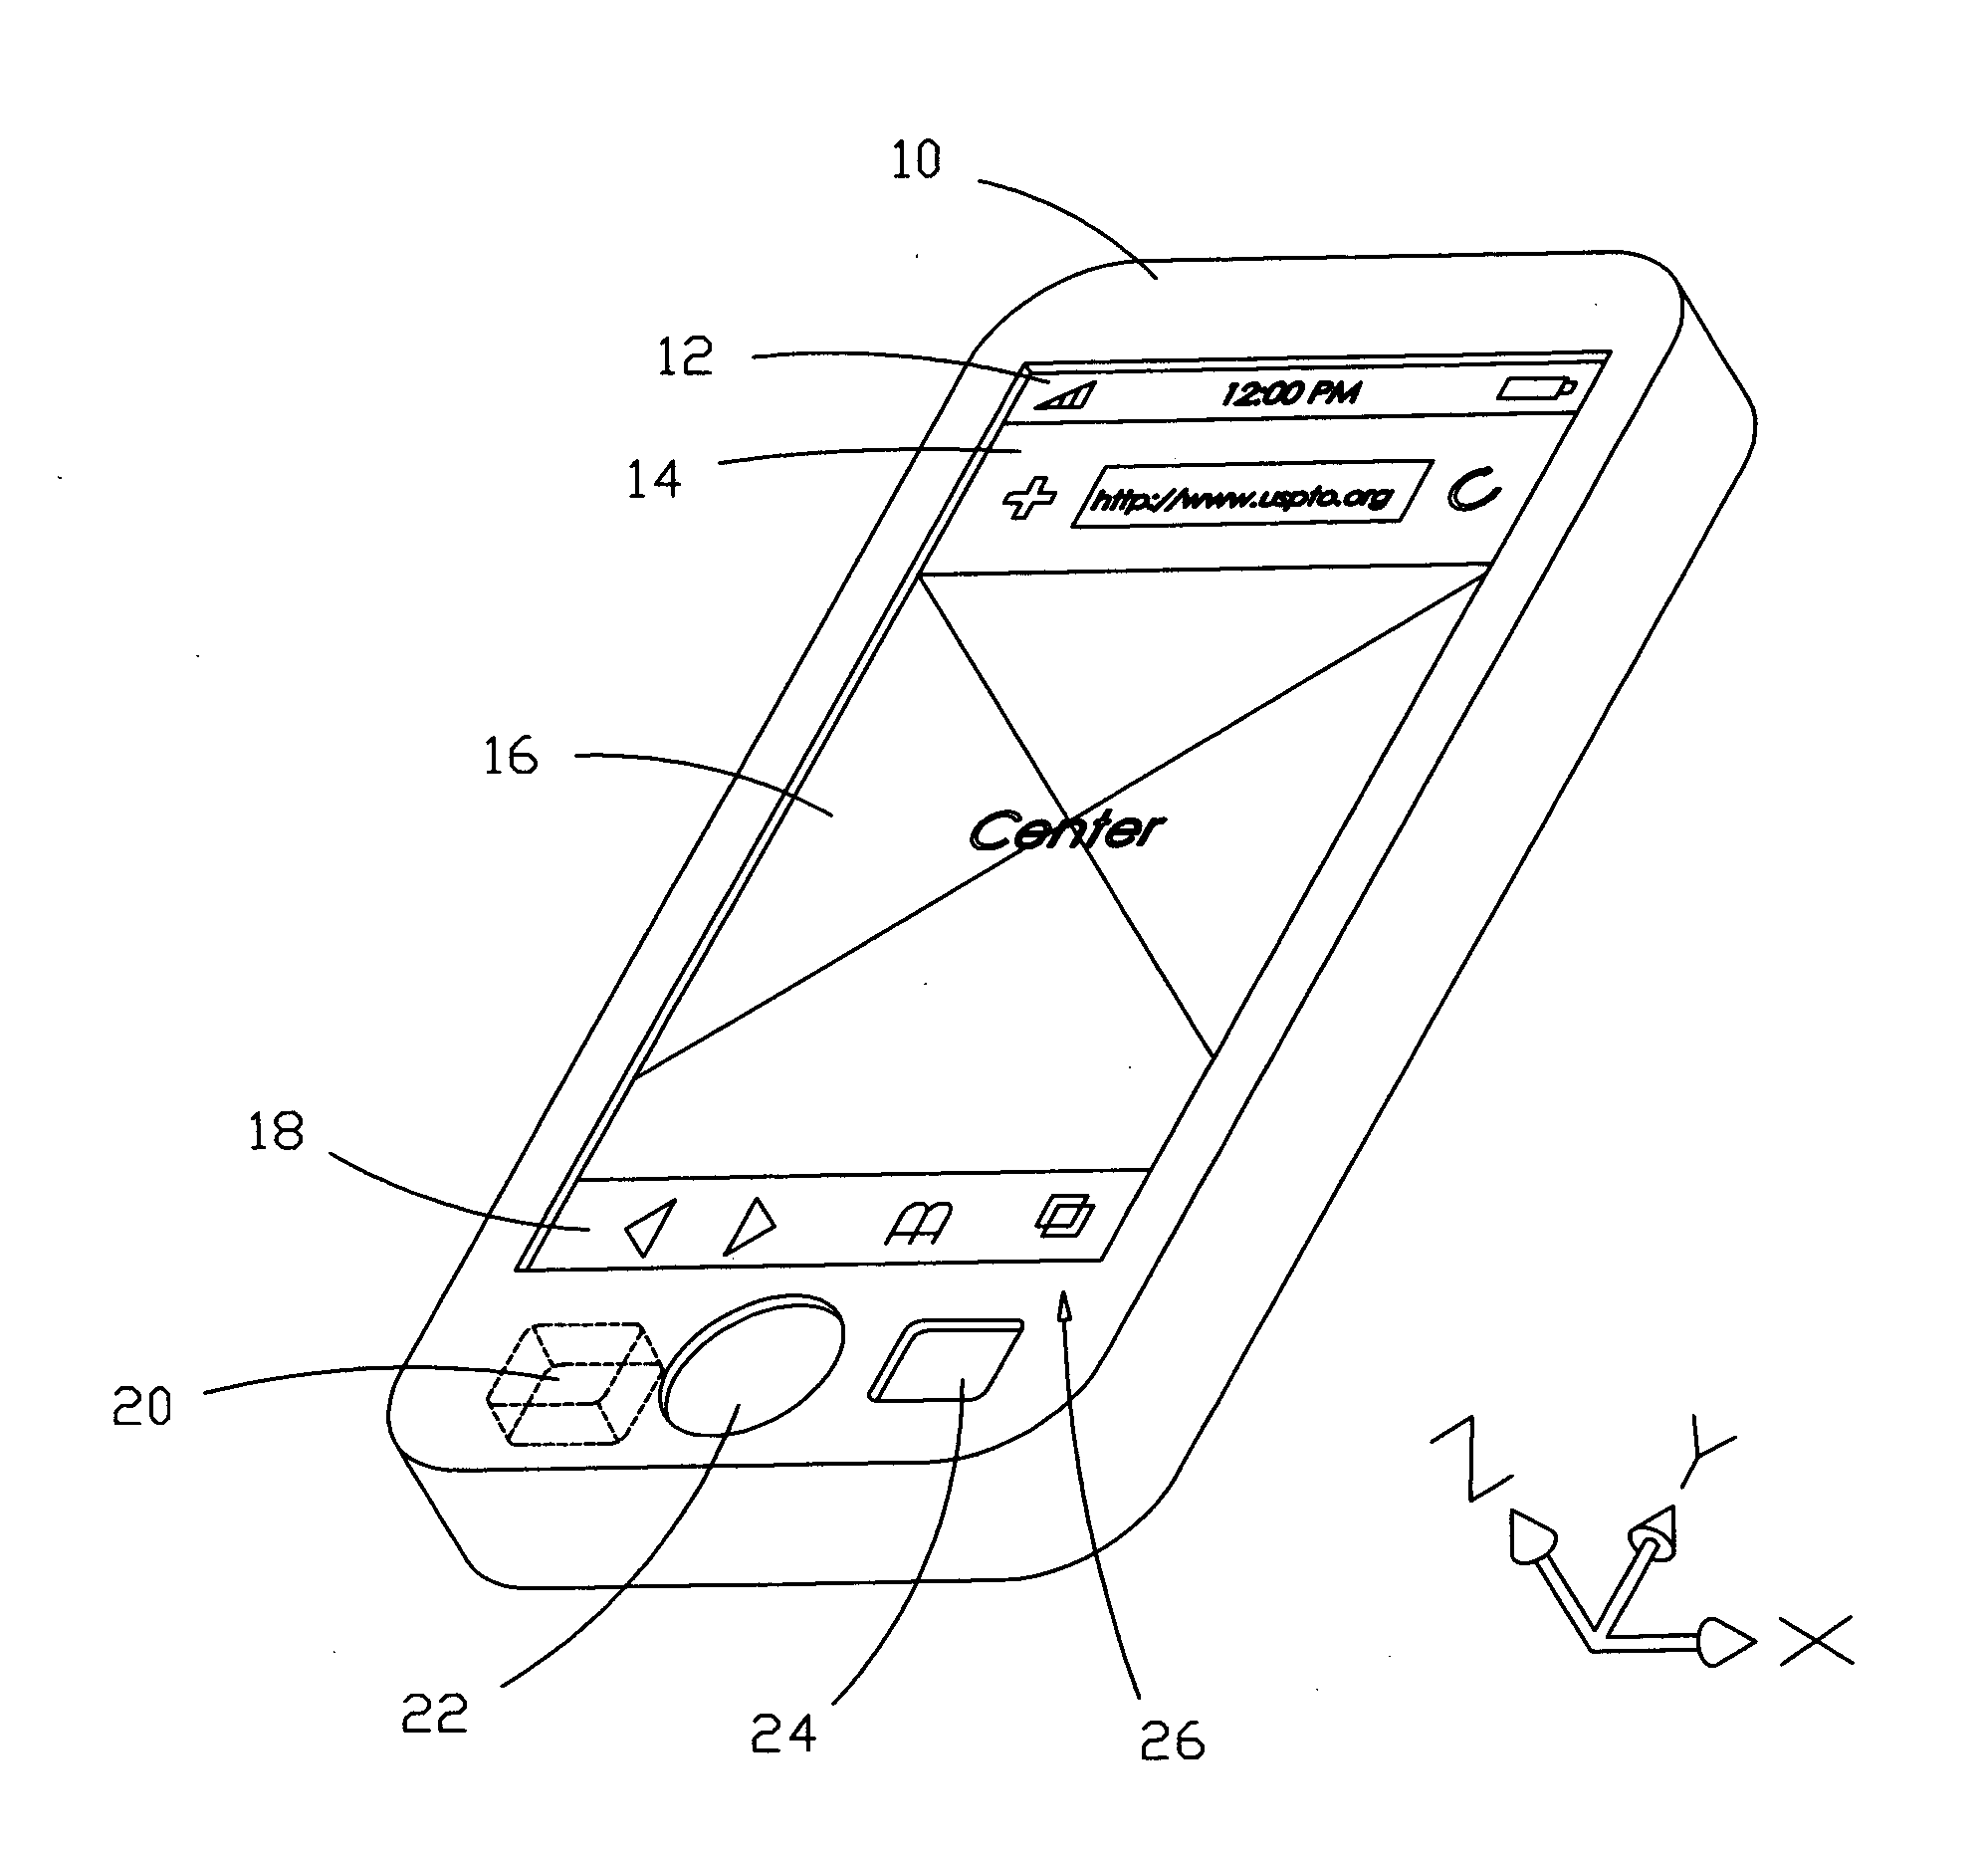 Scrolling and zooming of a portable device display with device motion